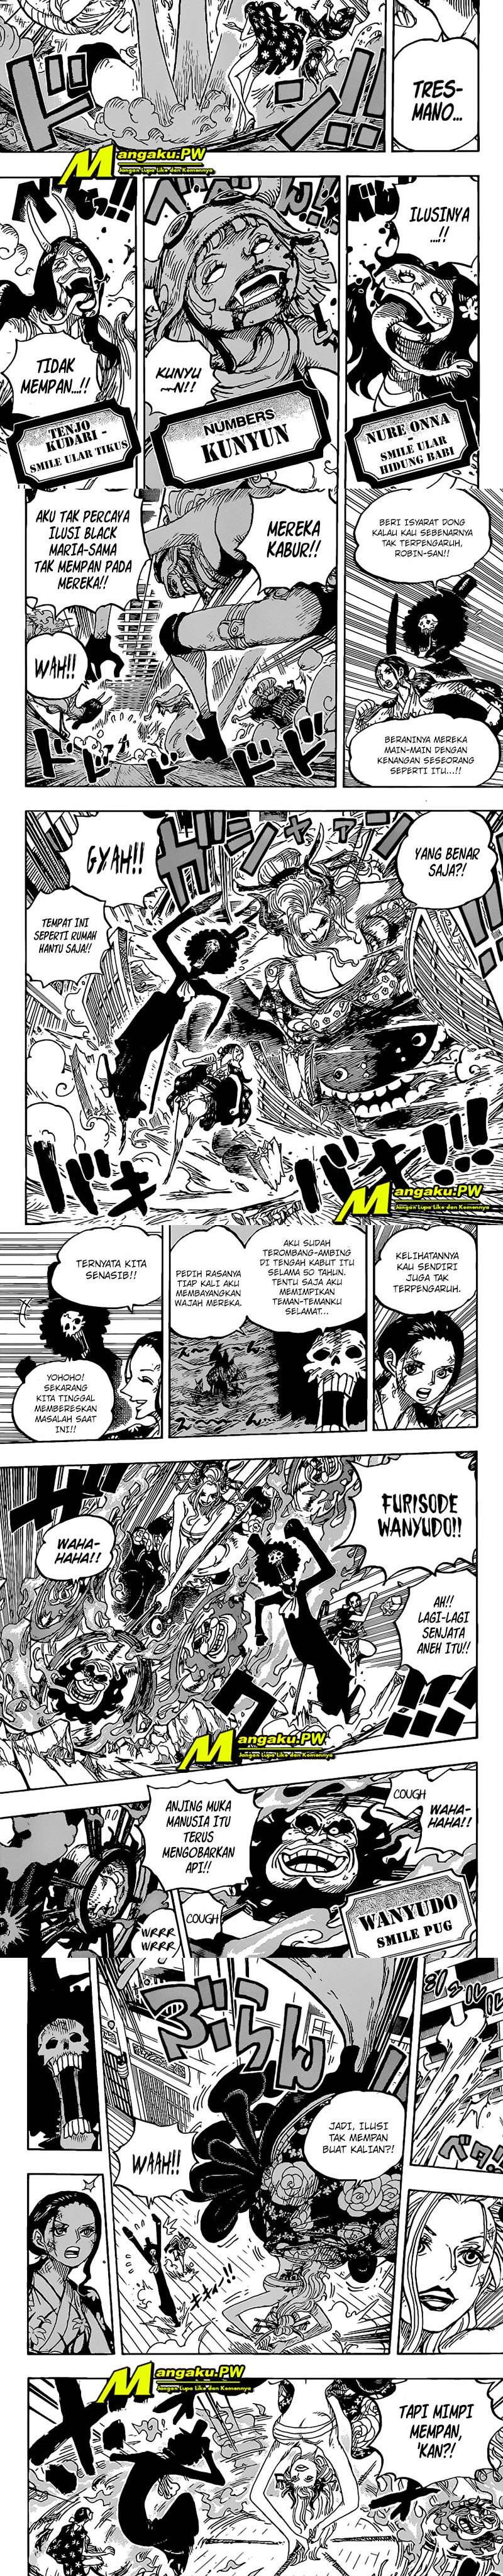 One Piece Chapter 1020 HQ Image 2